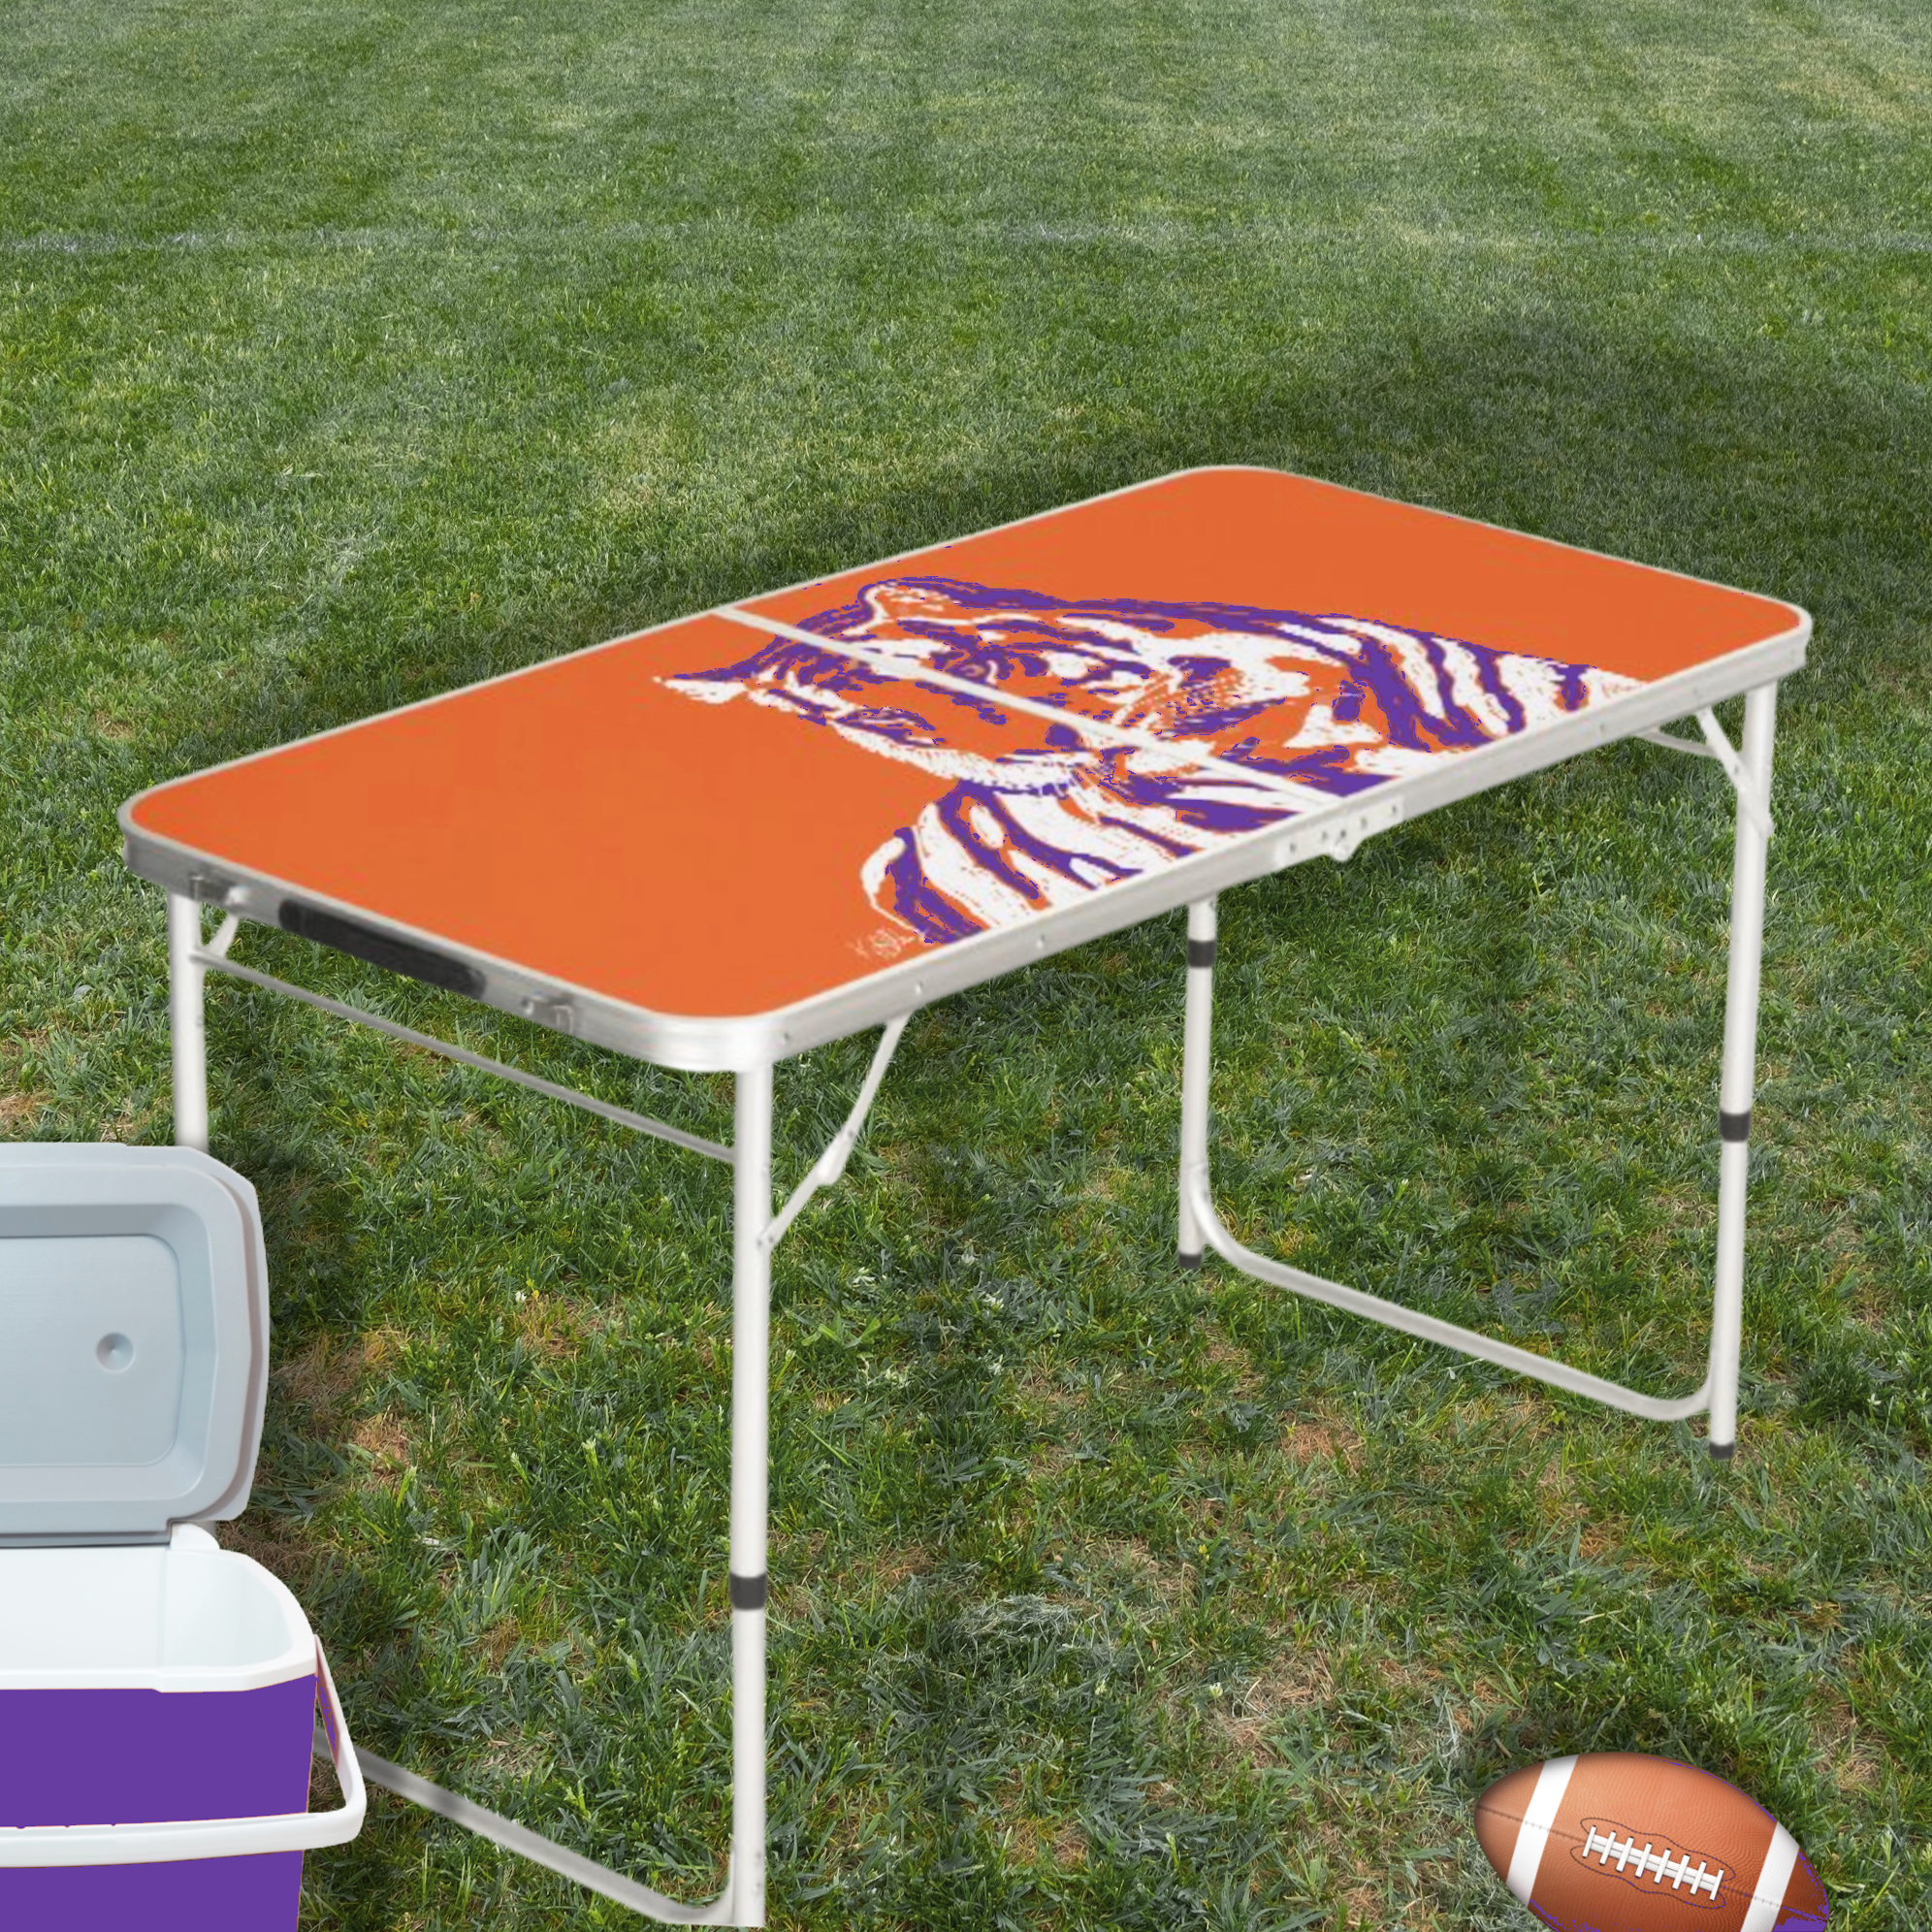 Staring Tiger Tailgate Table